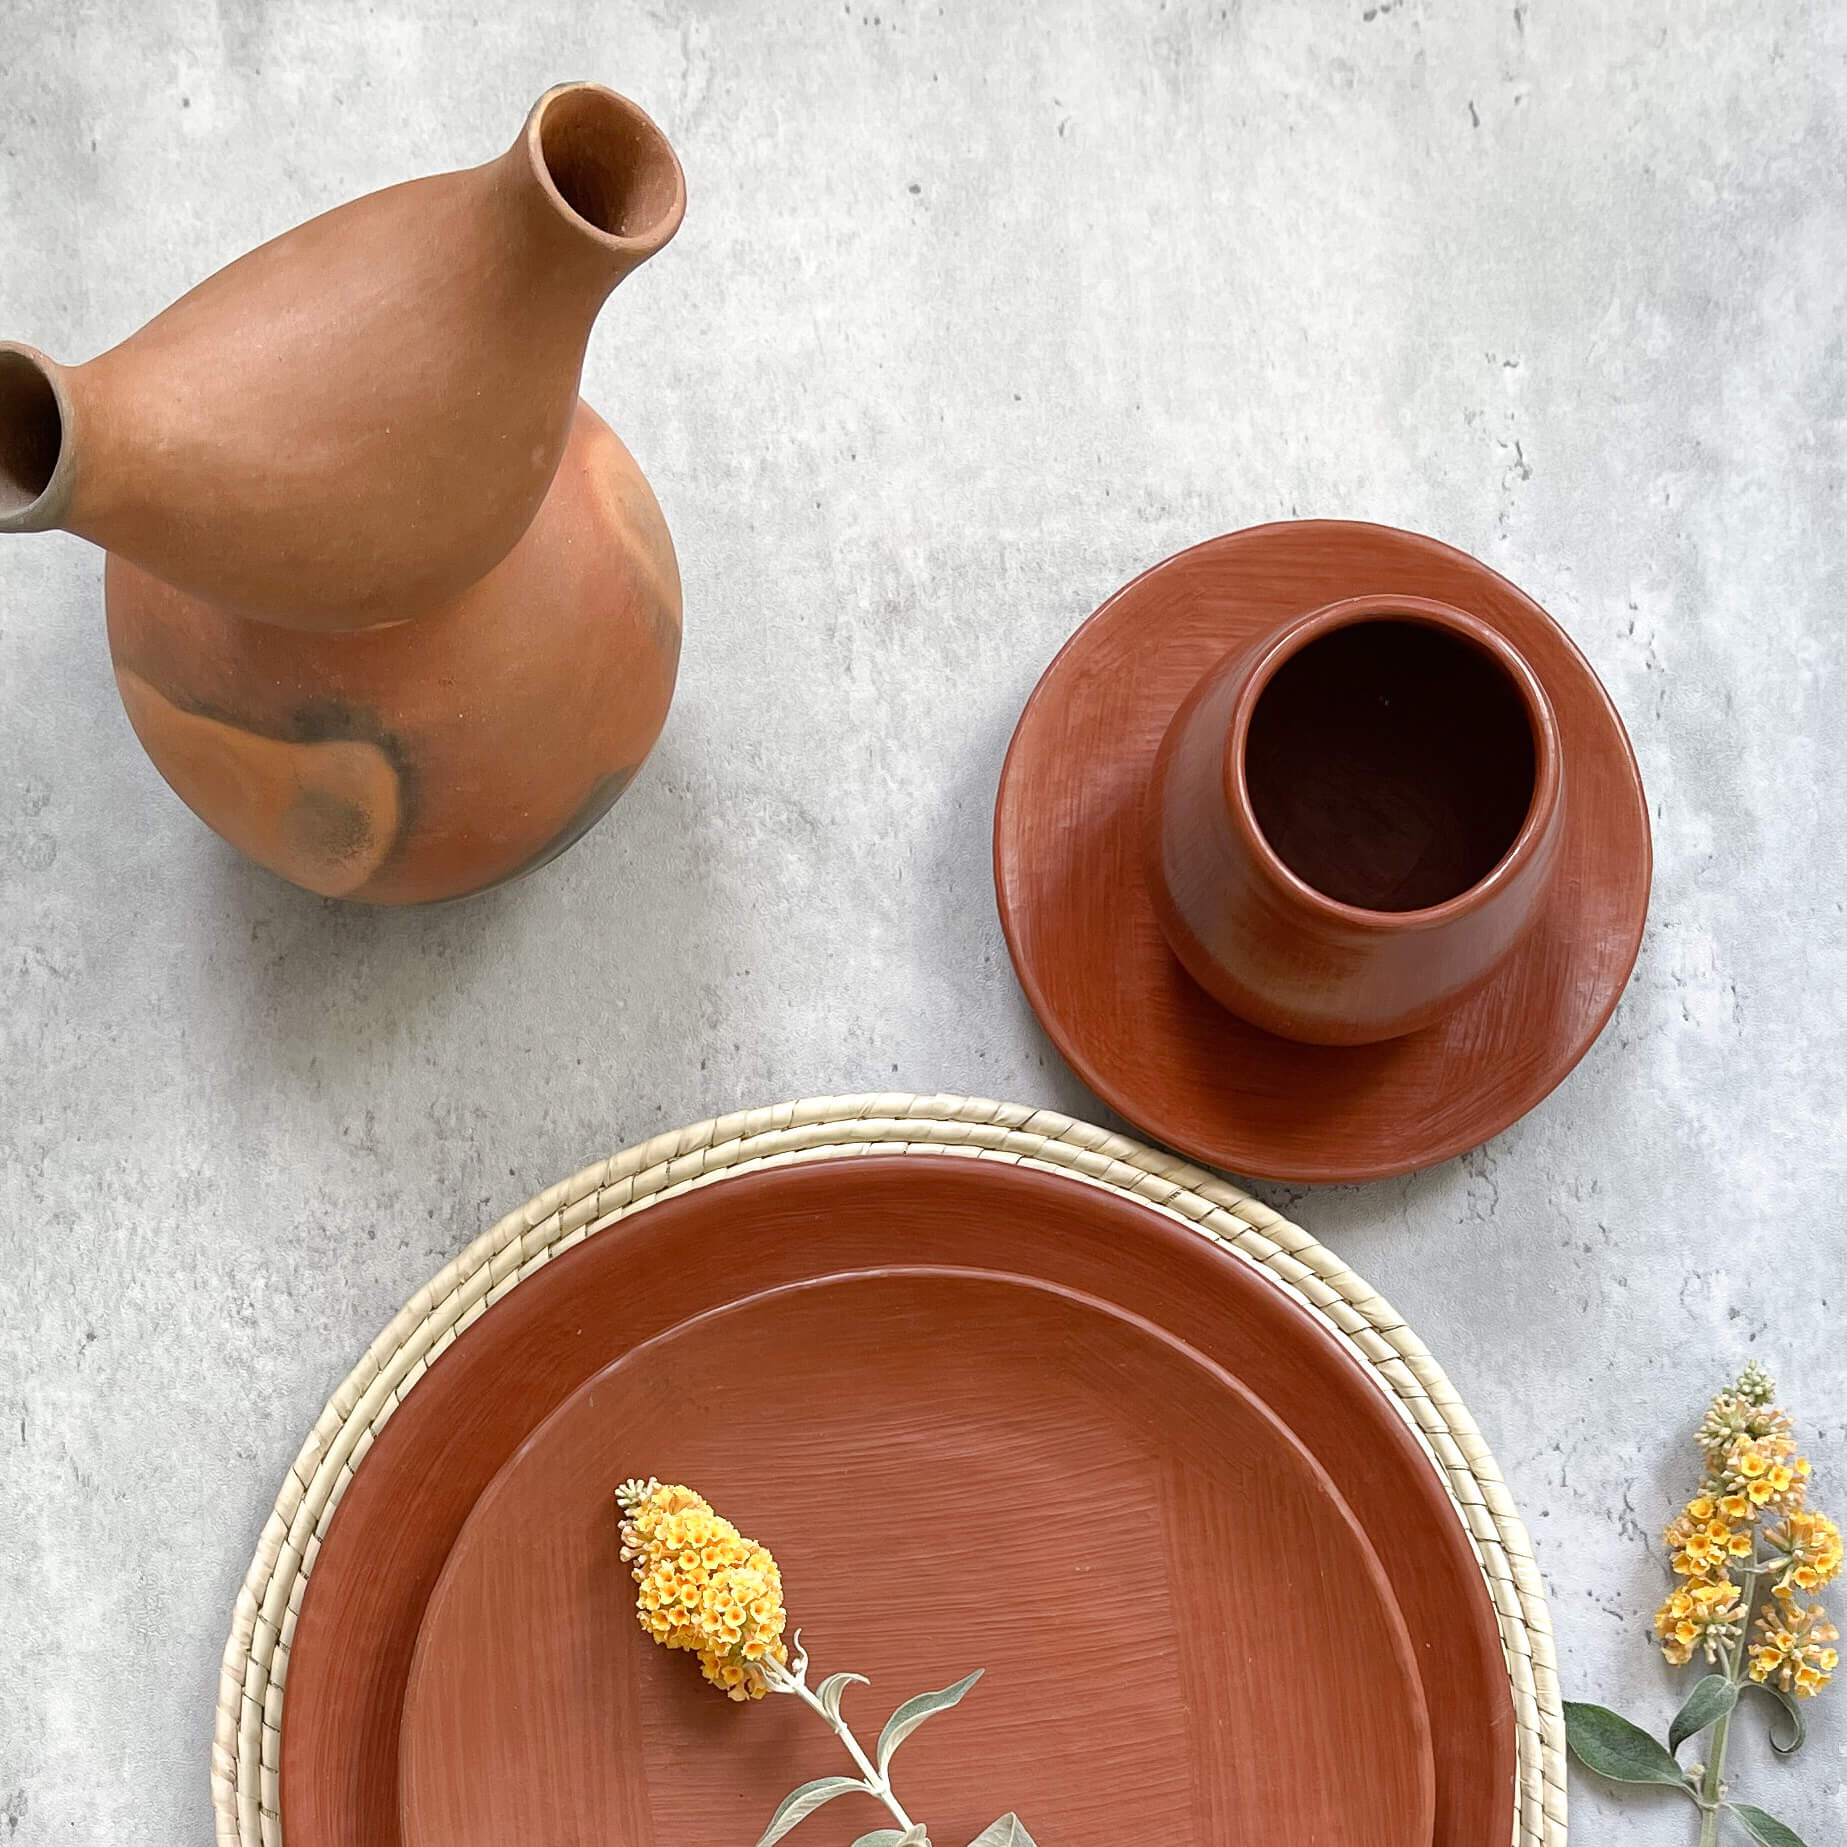 An assortment of Mexican red clay pottery including plates, a mug and a decorative vase.